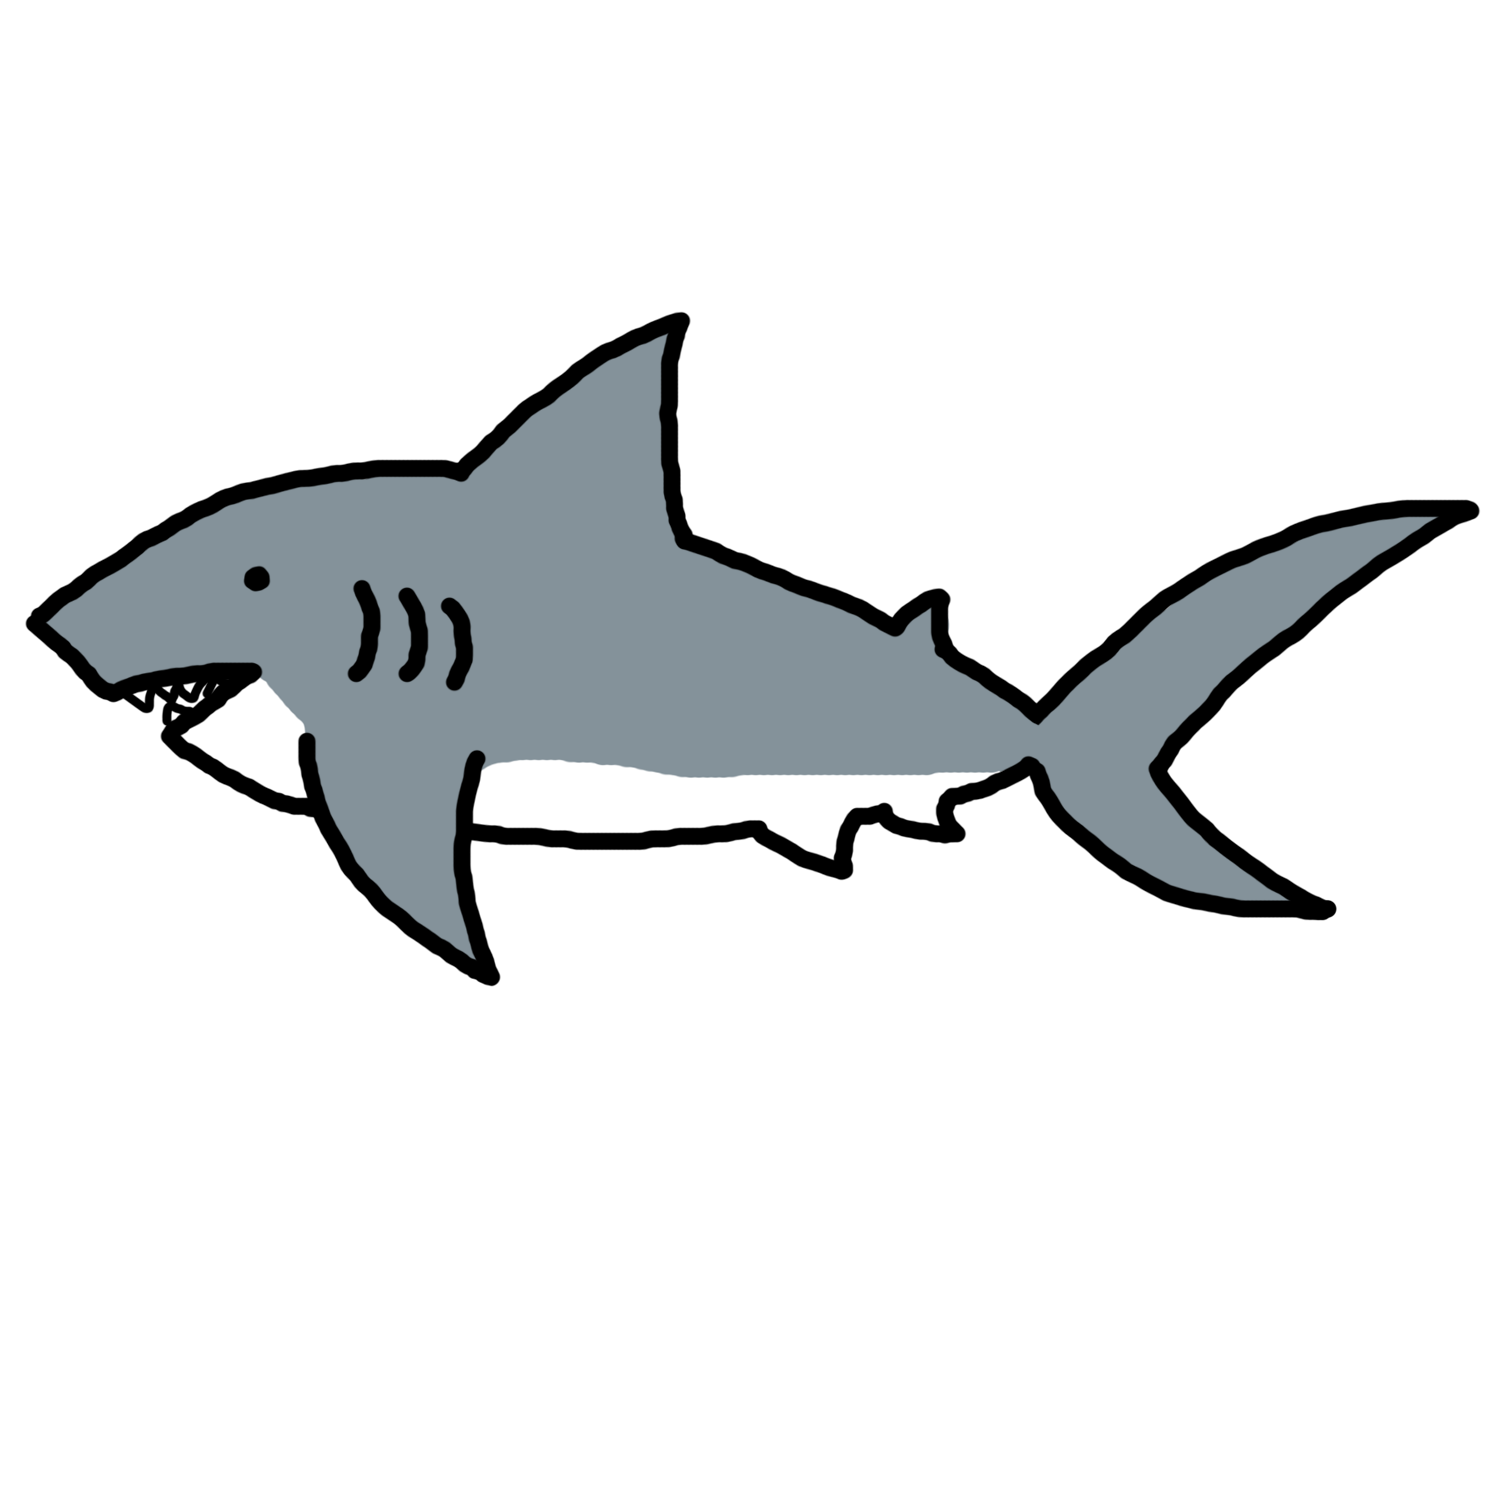 Shark clip art black and white free clipart images - Cliparting.com